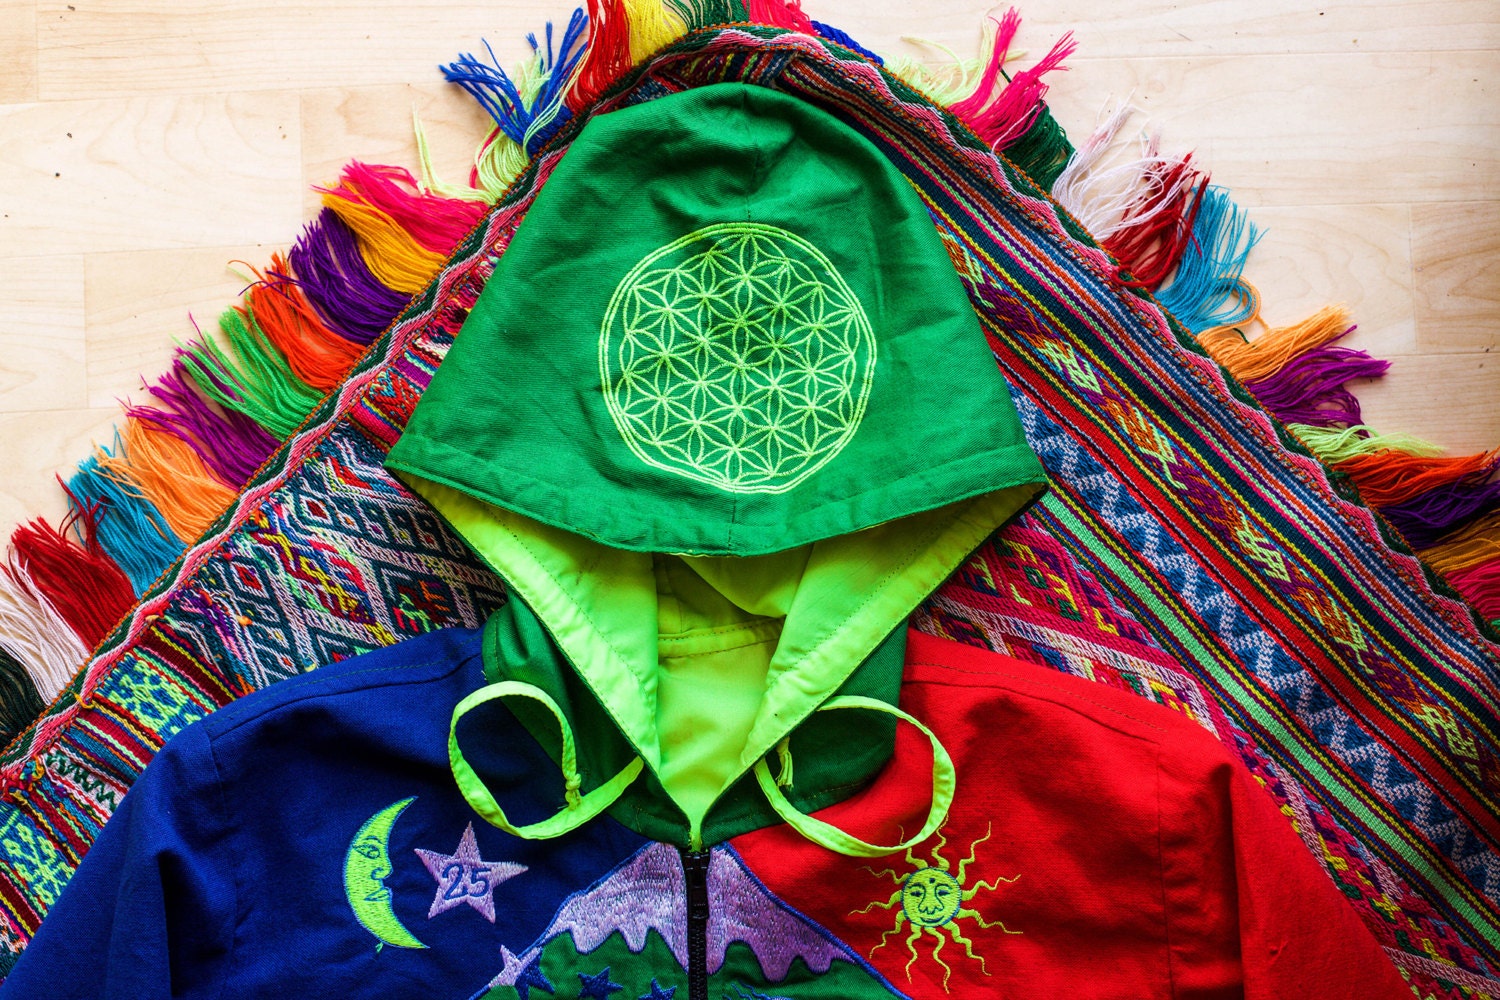 Albert Hofmann Bicycle Day UV jacket - handmade in any size - blacklight active 4 pockets with hoody and flower of life embroidery